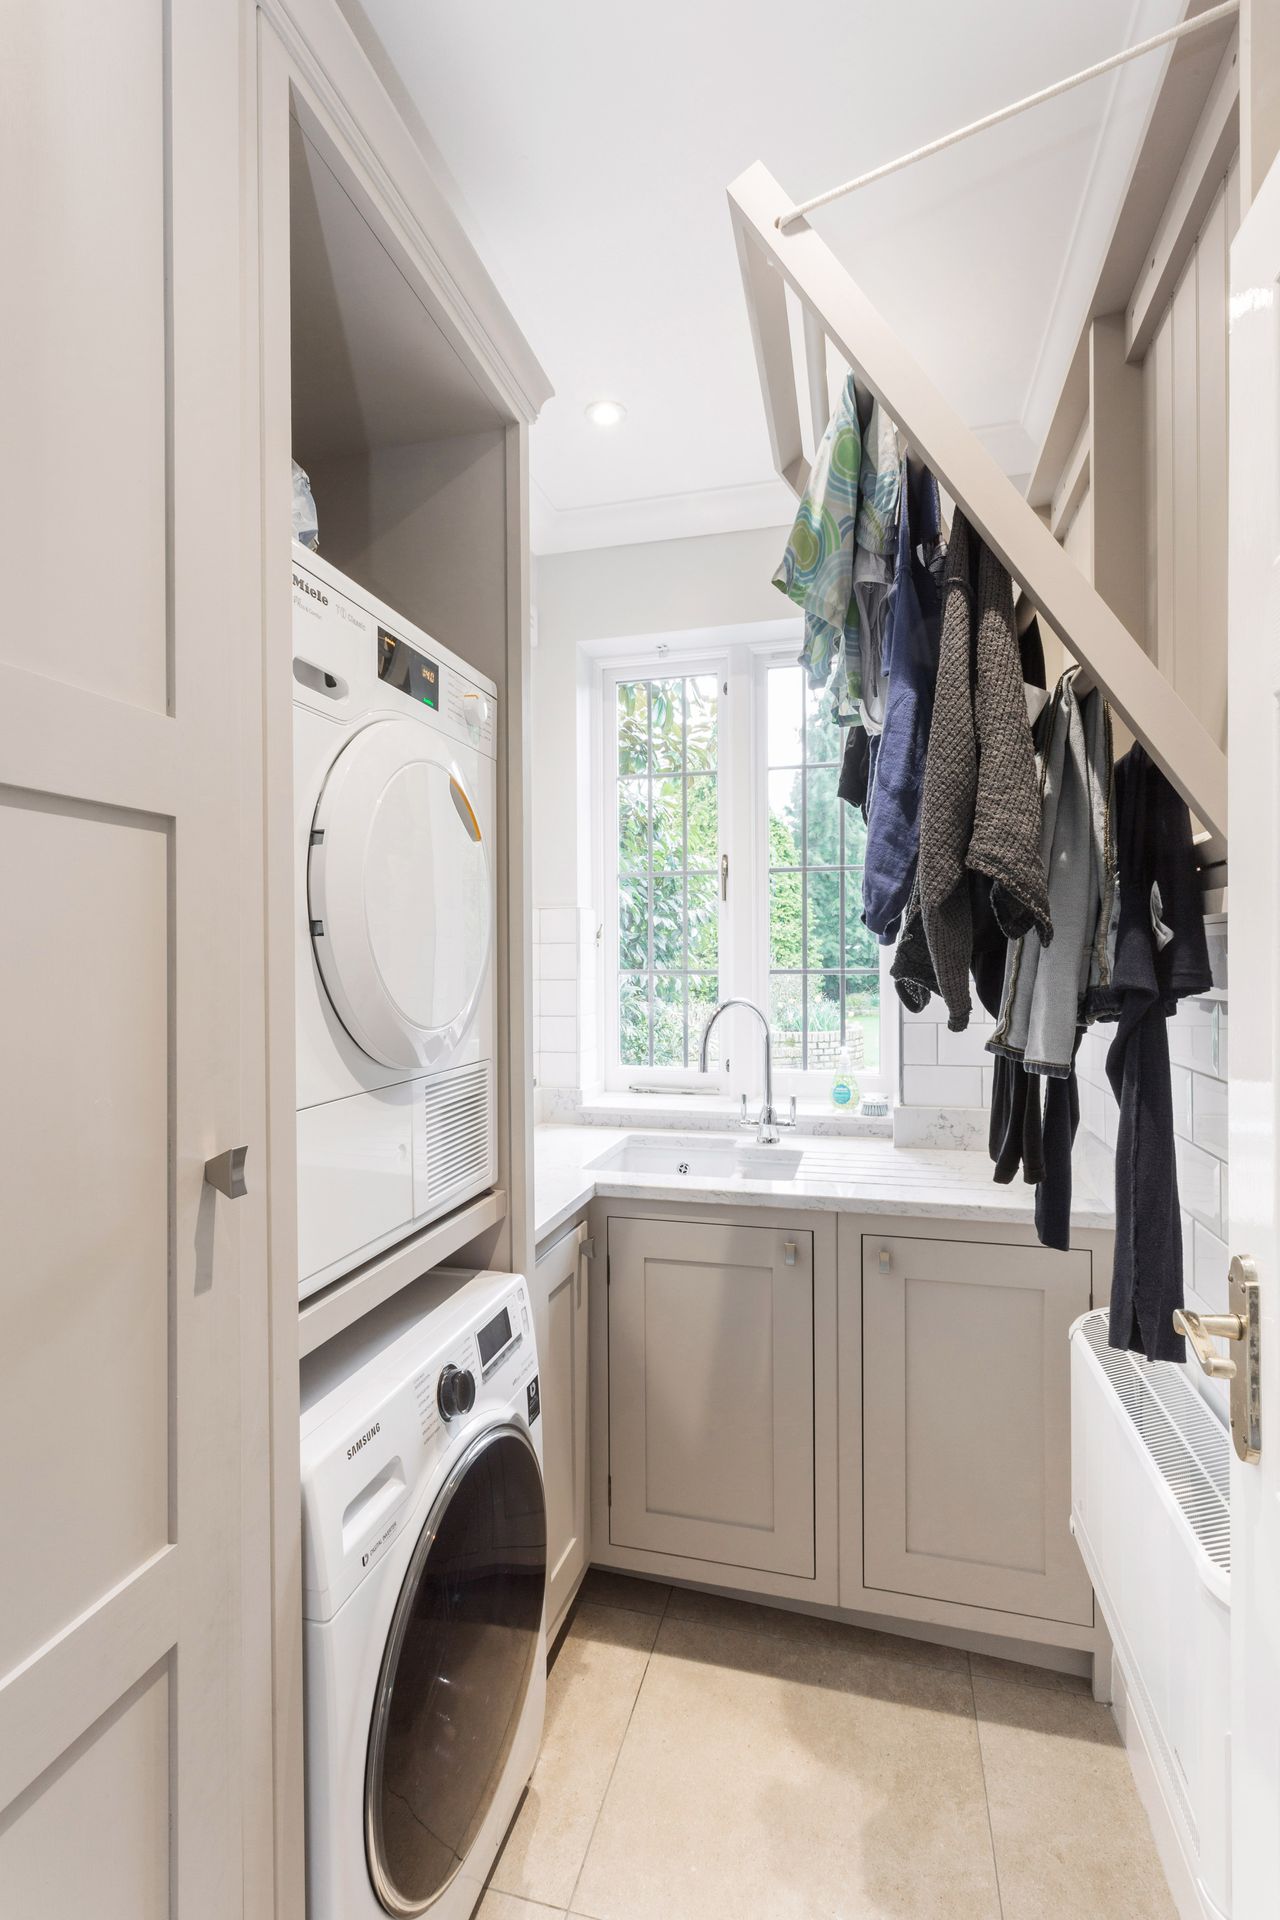 Utility room ideas: 22 inspiring ways to organise yours | Real Homes